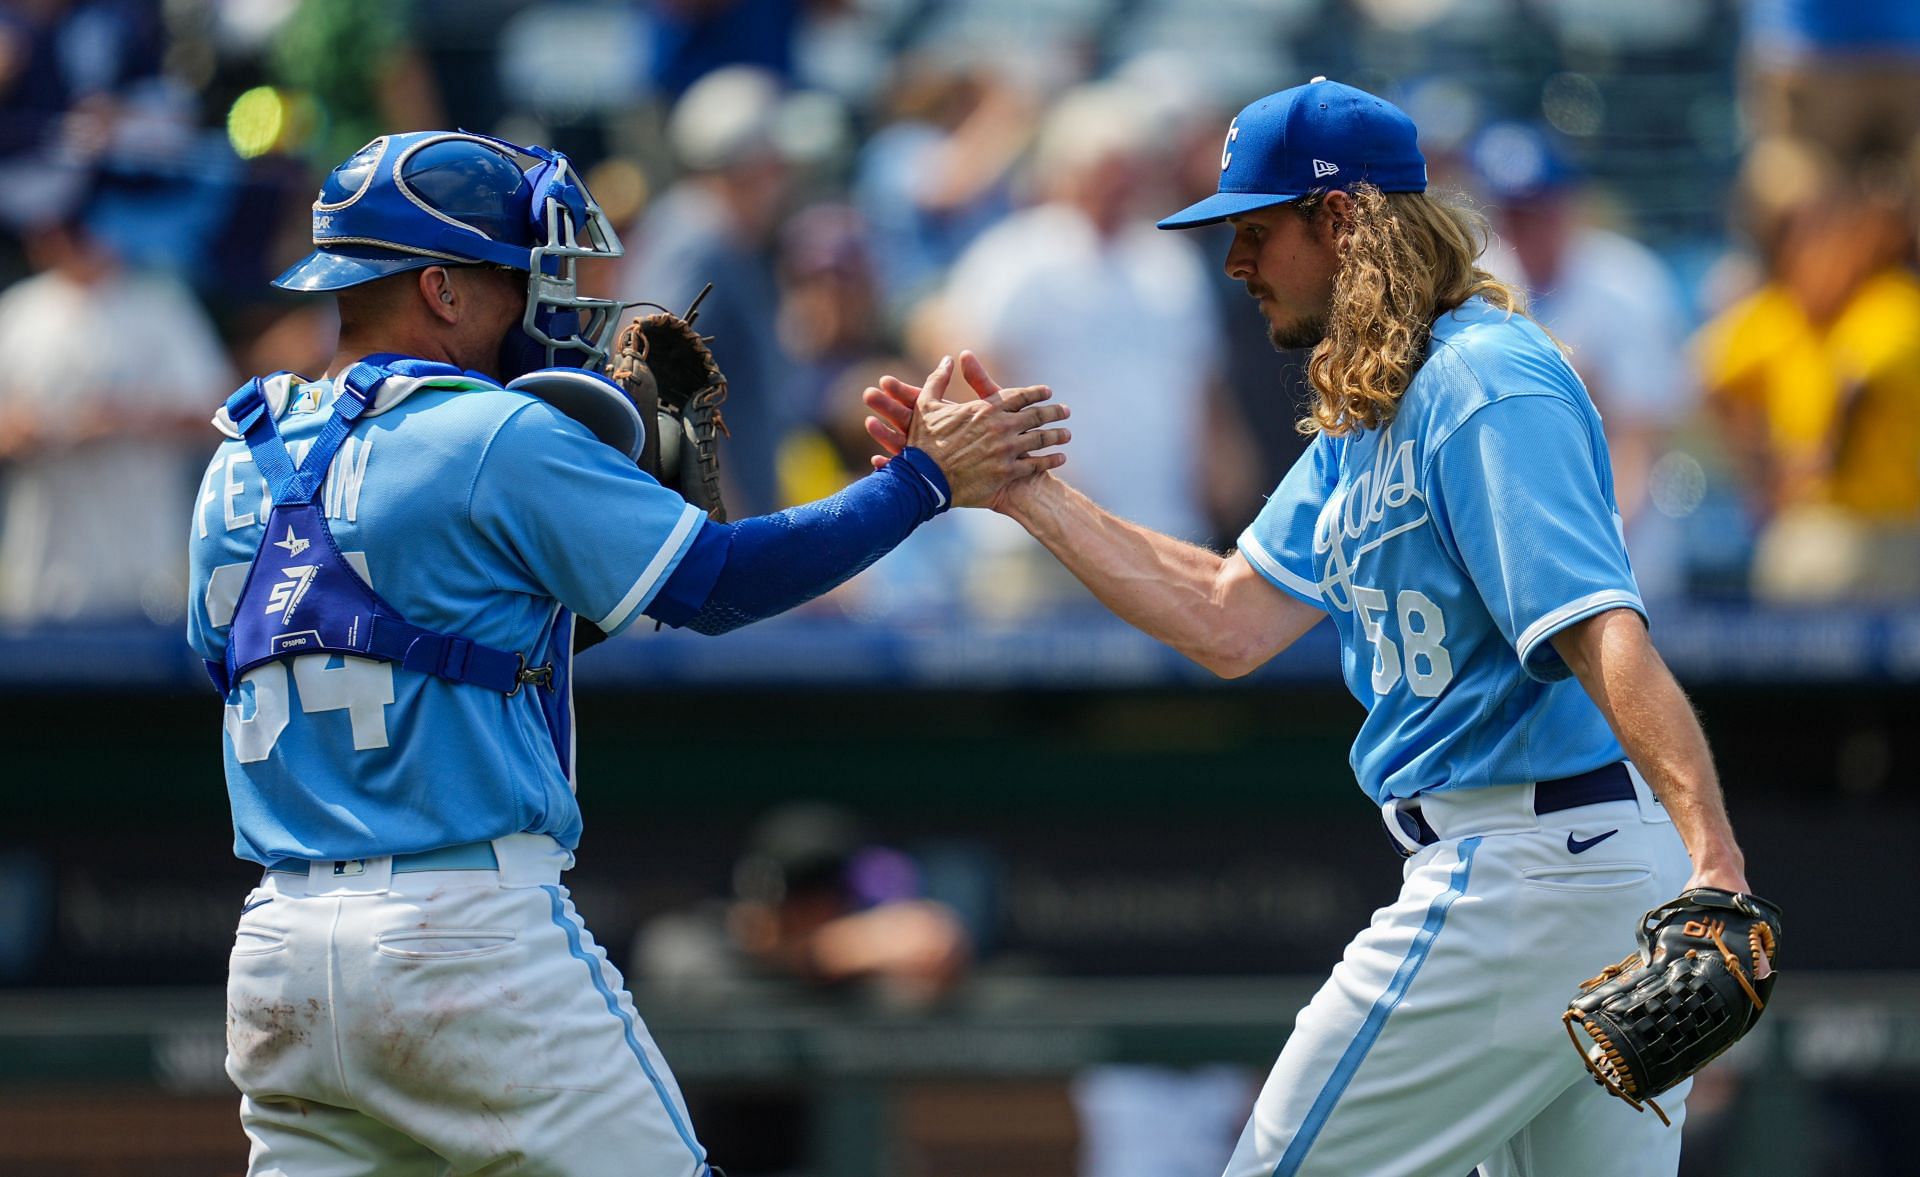 Freddy Fermin #34 of the Kansas City Royals celebrates with Scott Barlow #58 after a game against the Colorado Rockies